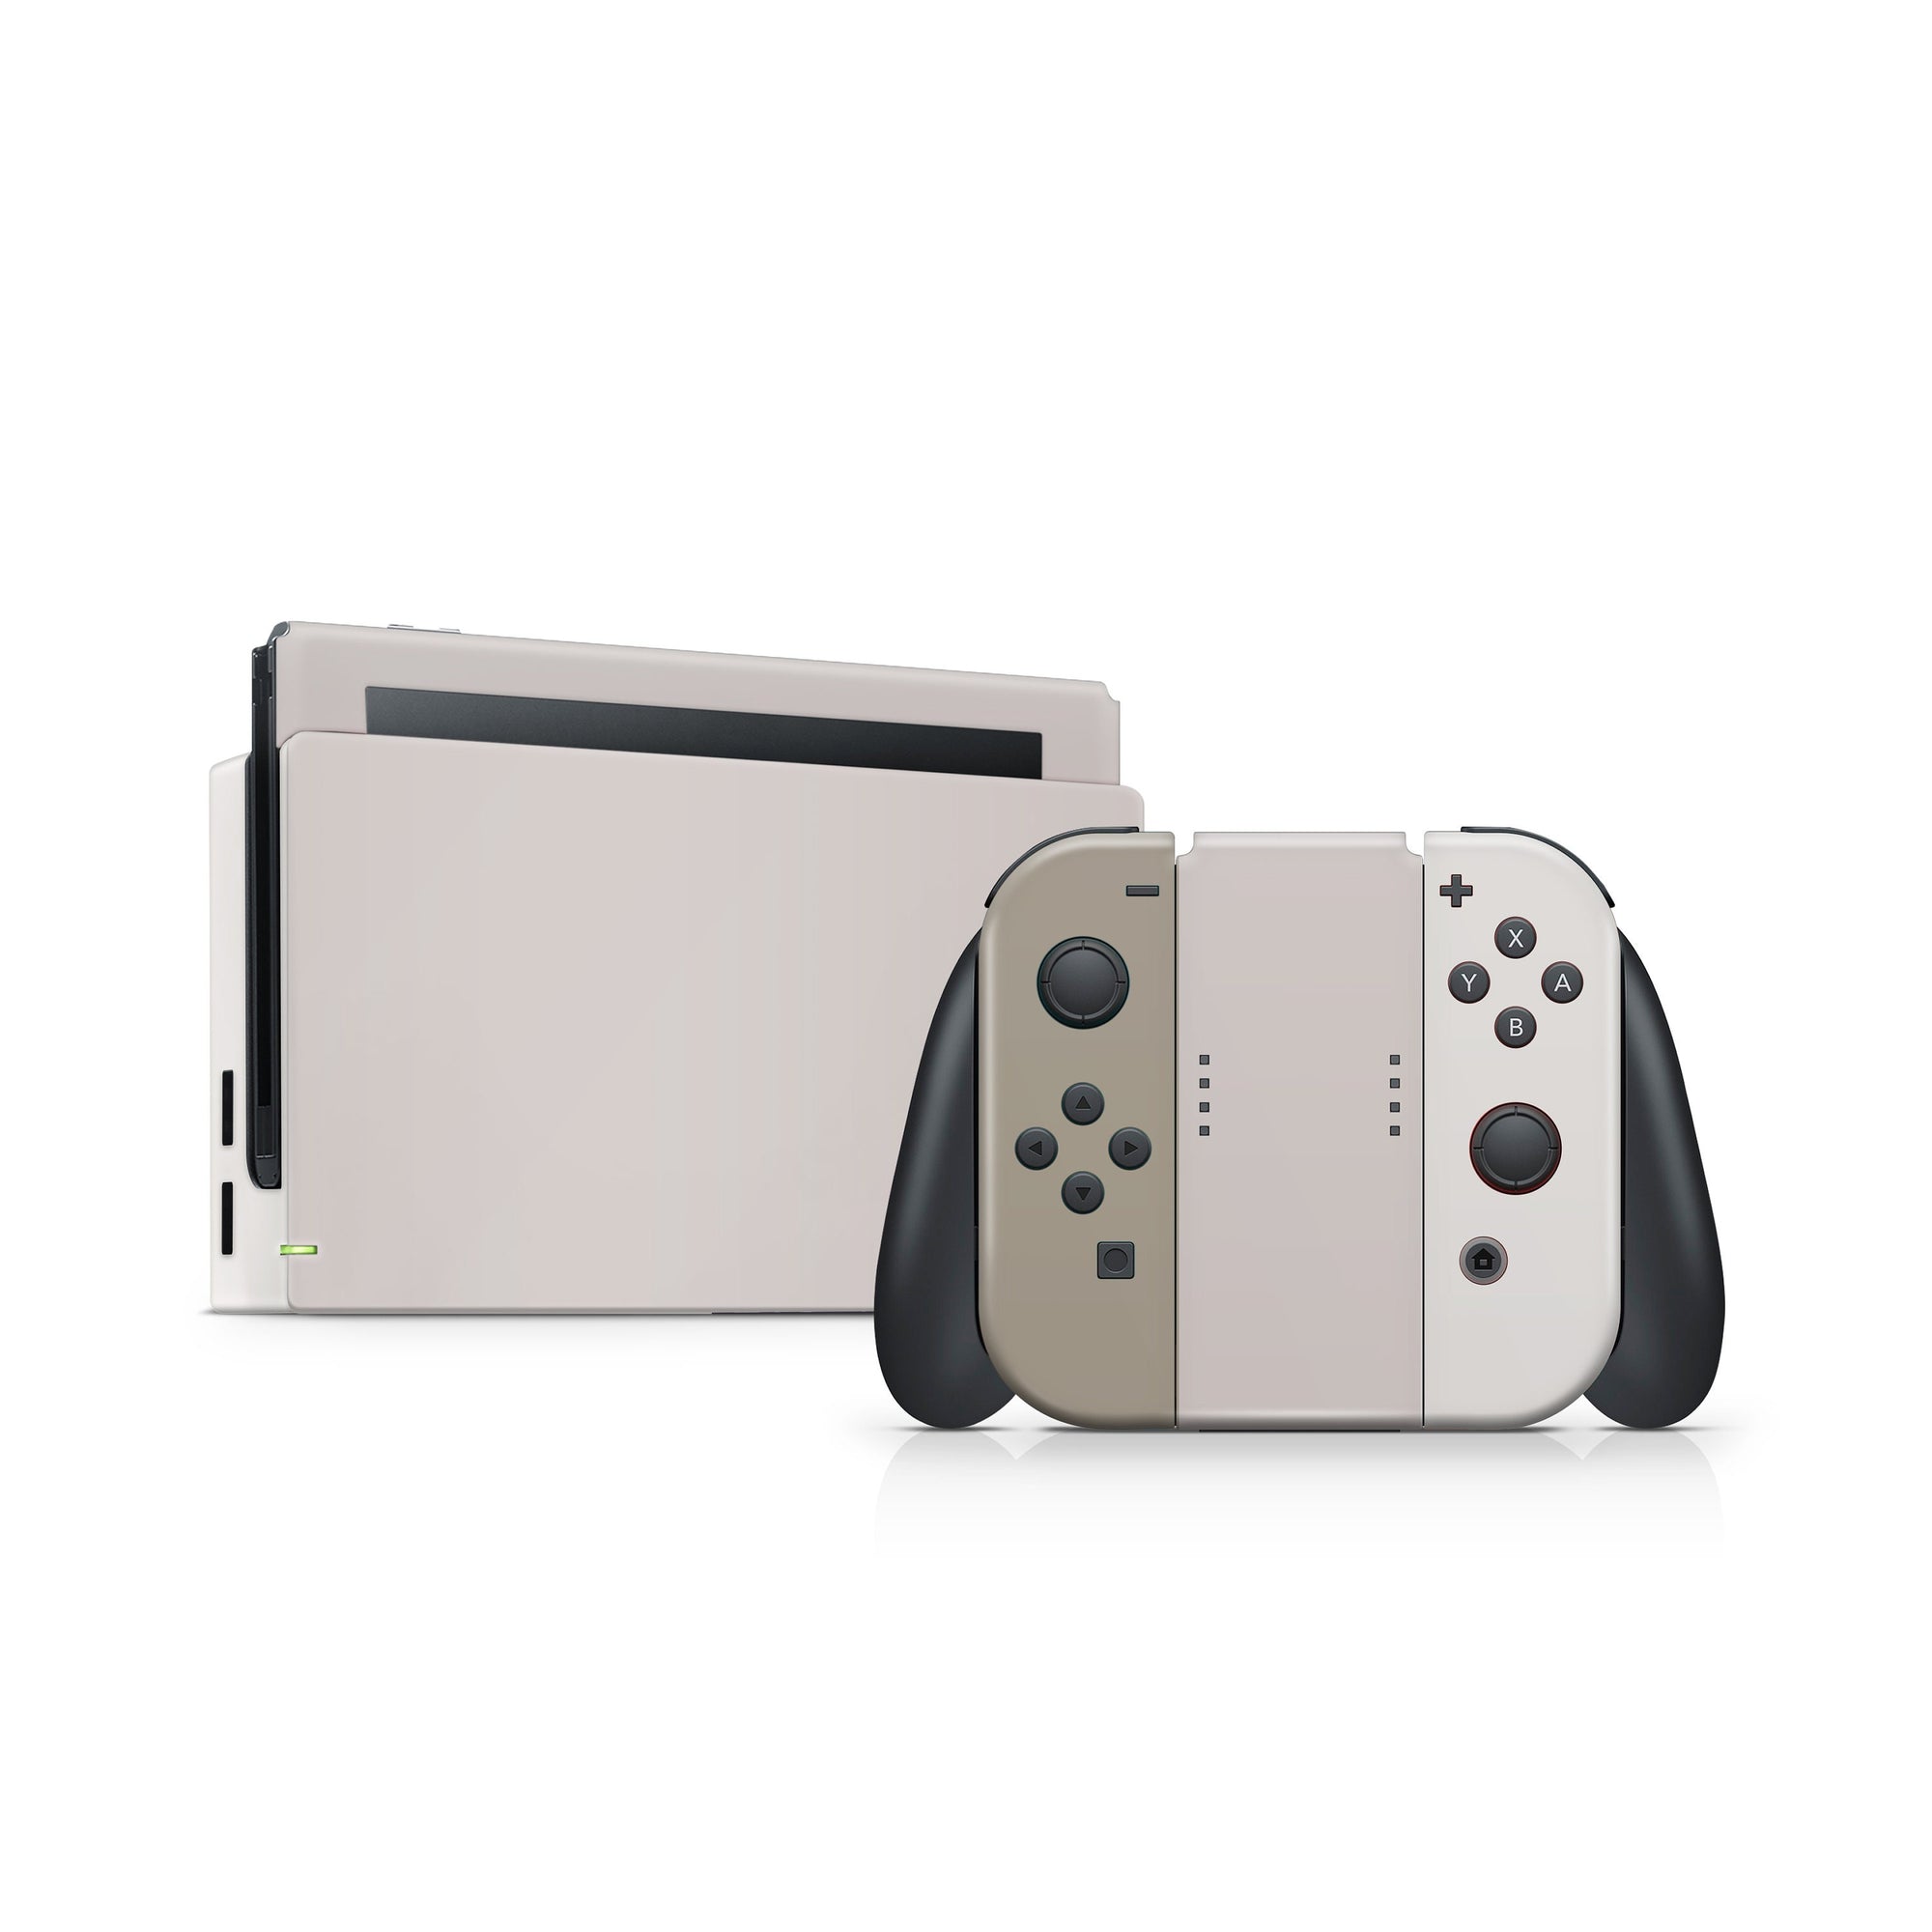 Nintendo switches skin Colorwave, Gray switch skin Color Blocking skin Premium Vinyl 3M Decal Stickers Full Cover